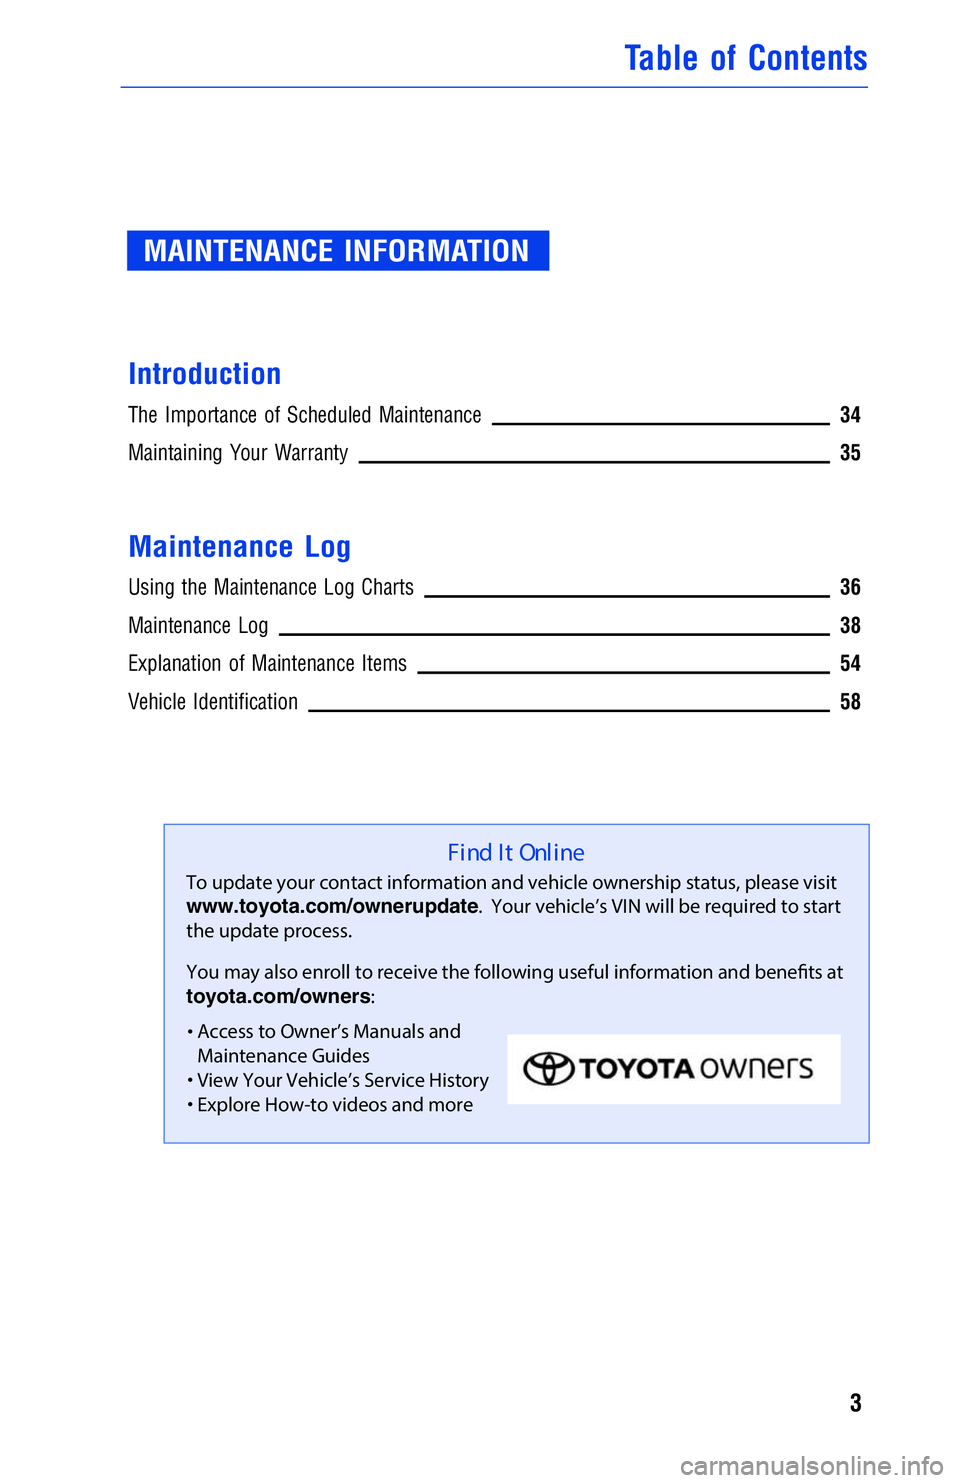 TOYOTA RAV4 2018  Warranties & Maintenance Guides (in English) MAINTENANCE INFORMATION
Introduction
The Importance of Scheduled Maintenance34
Maintaining Your Warranty35
Maintenance Log
Using the Maintenance Log Charts36
Maintenance Log38
Explanation of Maintenan